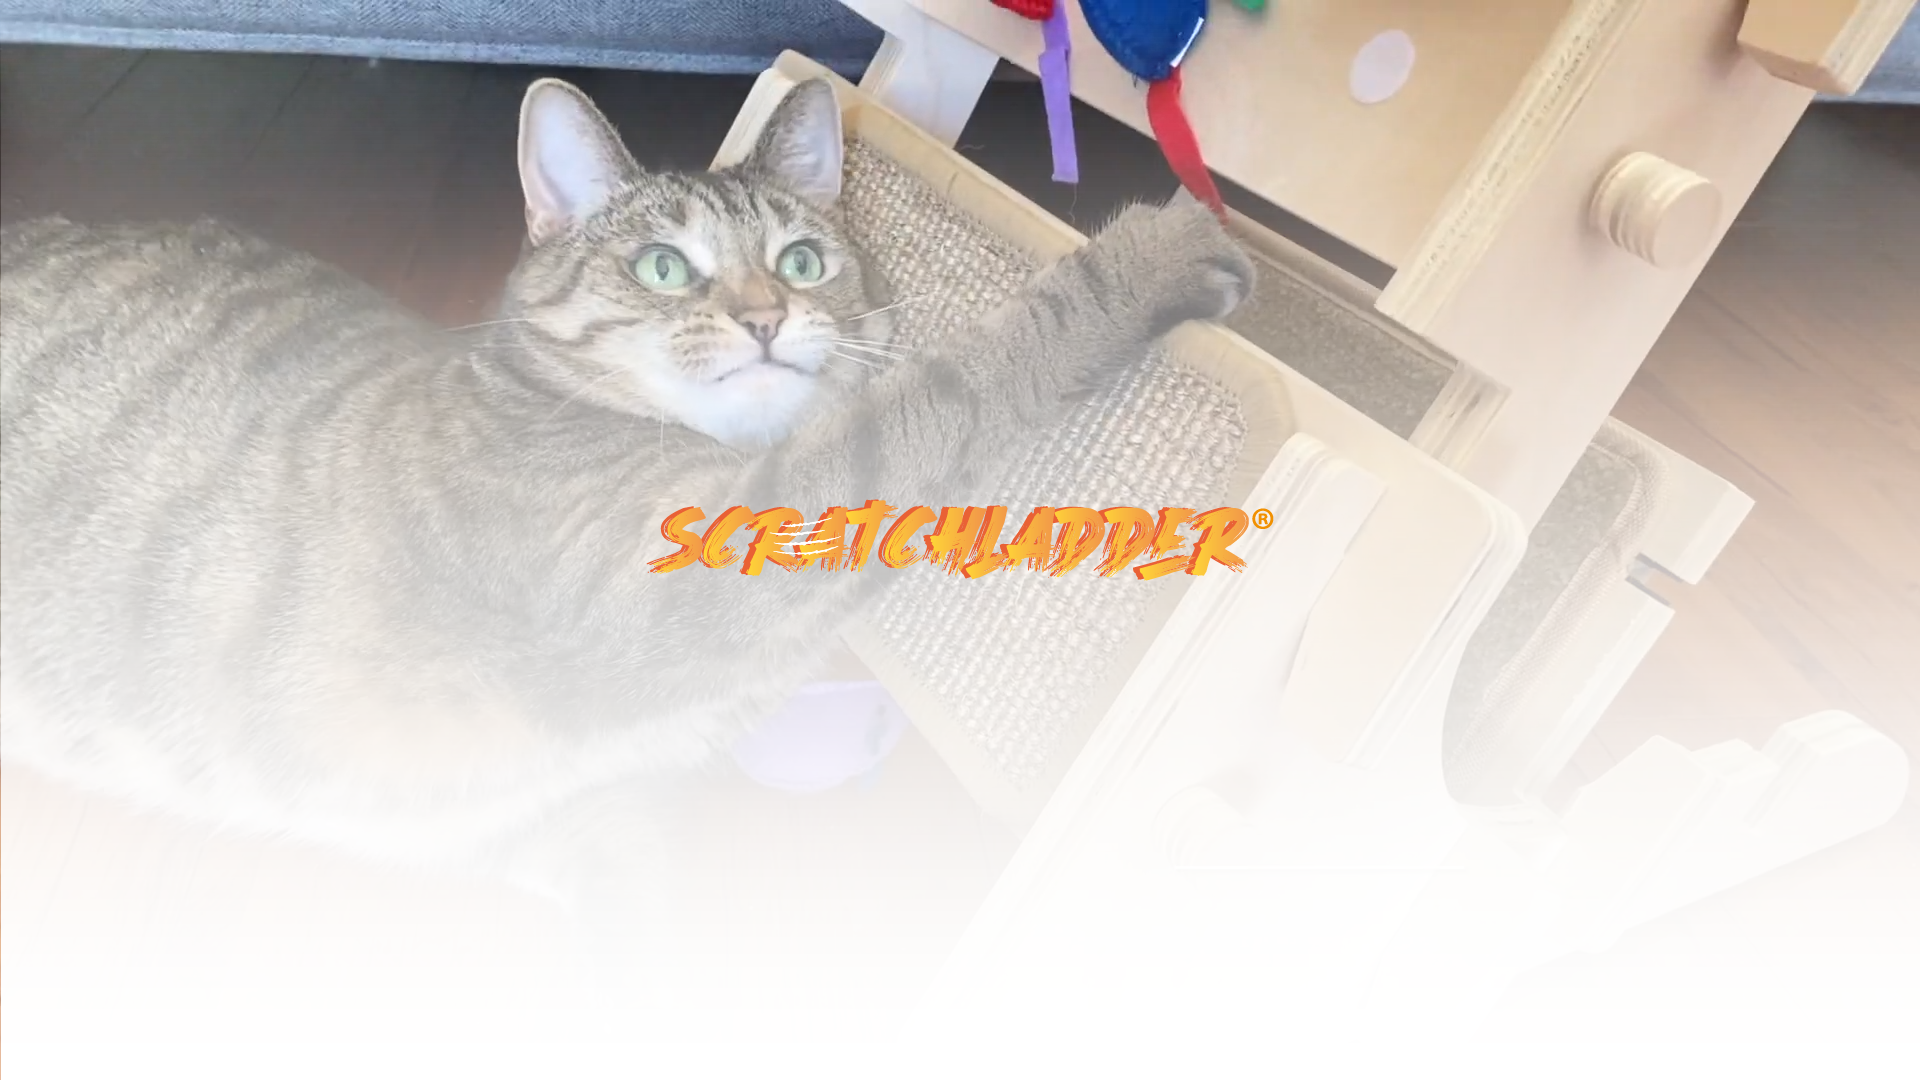 Load video: Scratchladder | Scratch Play Meow